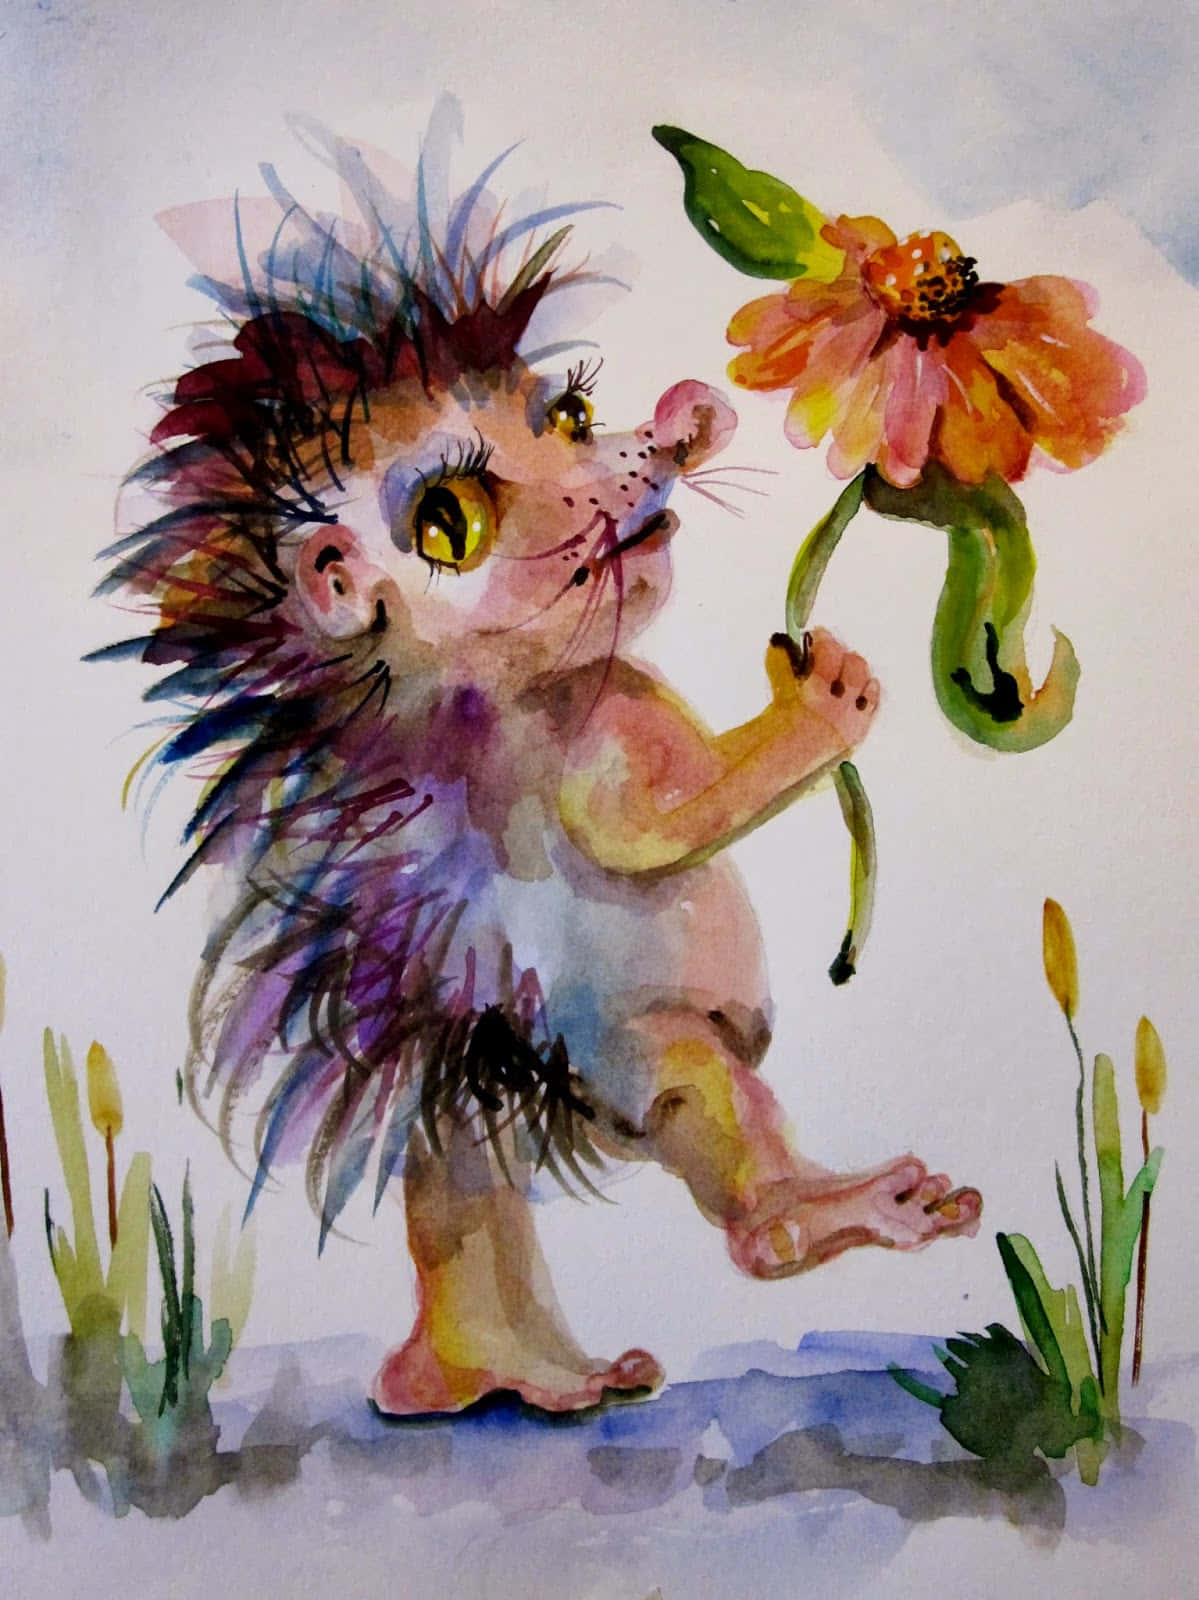 A Watercolor Painting Of A Hedgehog Holding A Flower